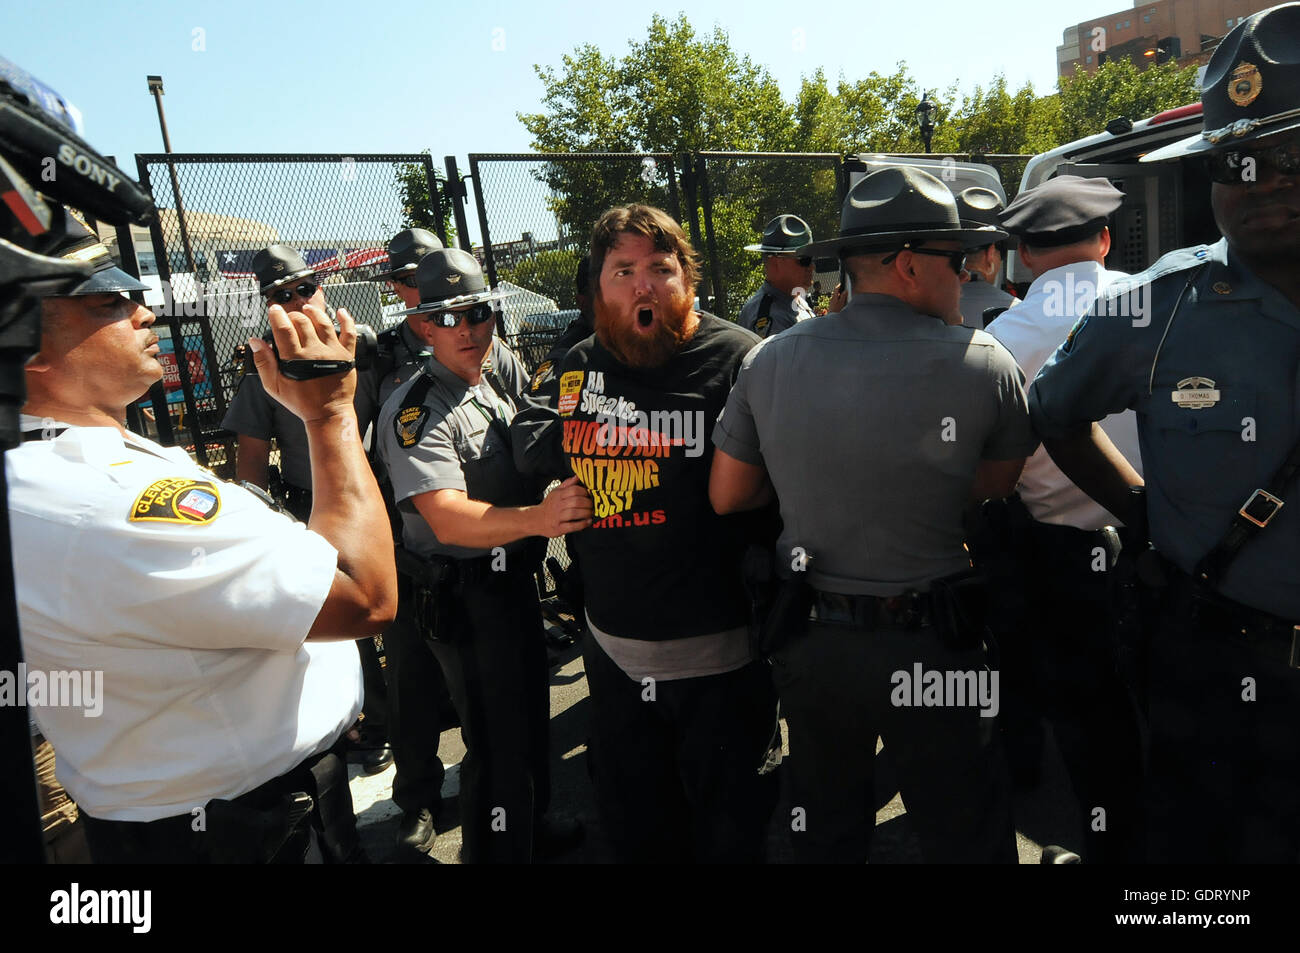 Cleveland, Ohio, USA. 20th July, 2016. A member of the Revolutionary Communist Party is arrested after the group attempted to burn a flag near the Quicken Loans Arena on day three of the 2016 Republican National Convention. Credit:  Paul Hennessy/Alamy Live News Stock Photo